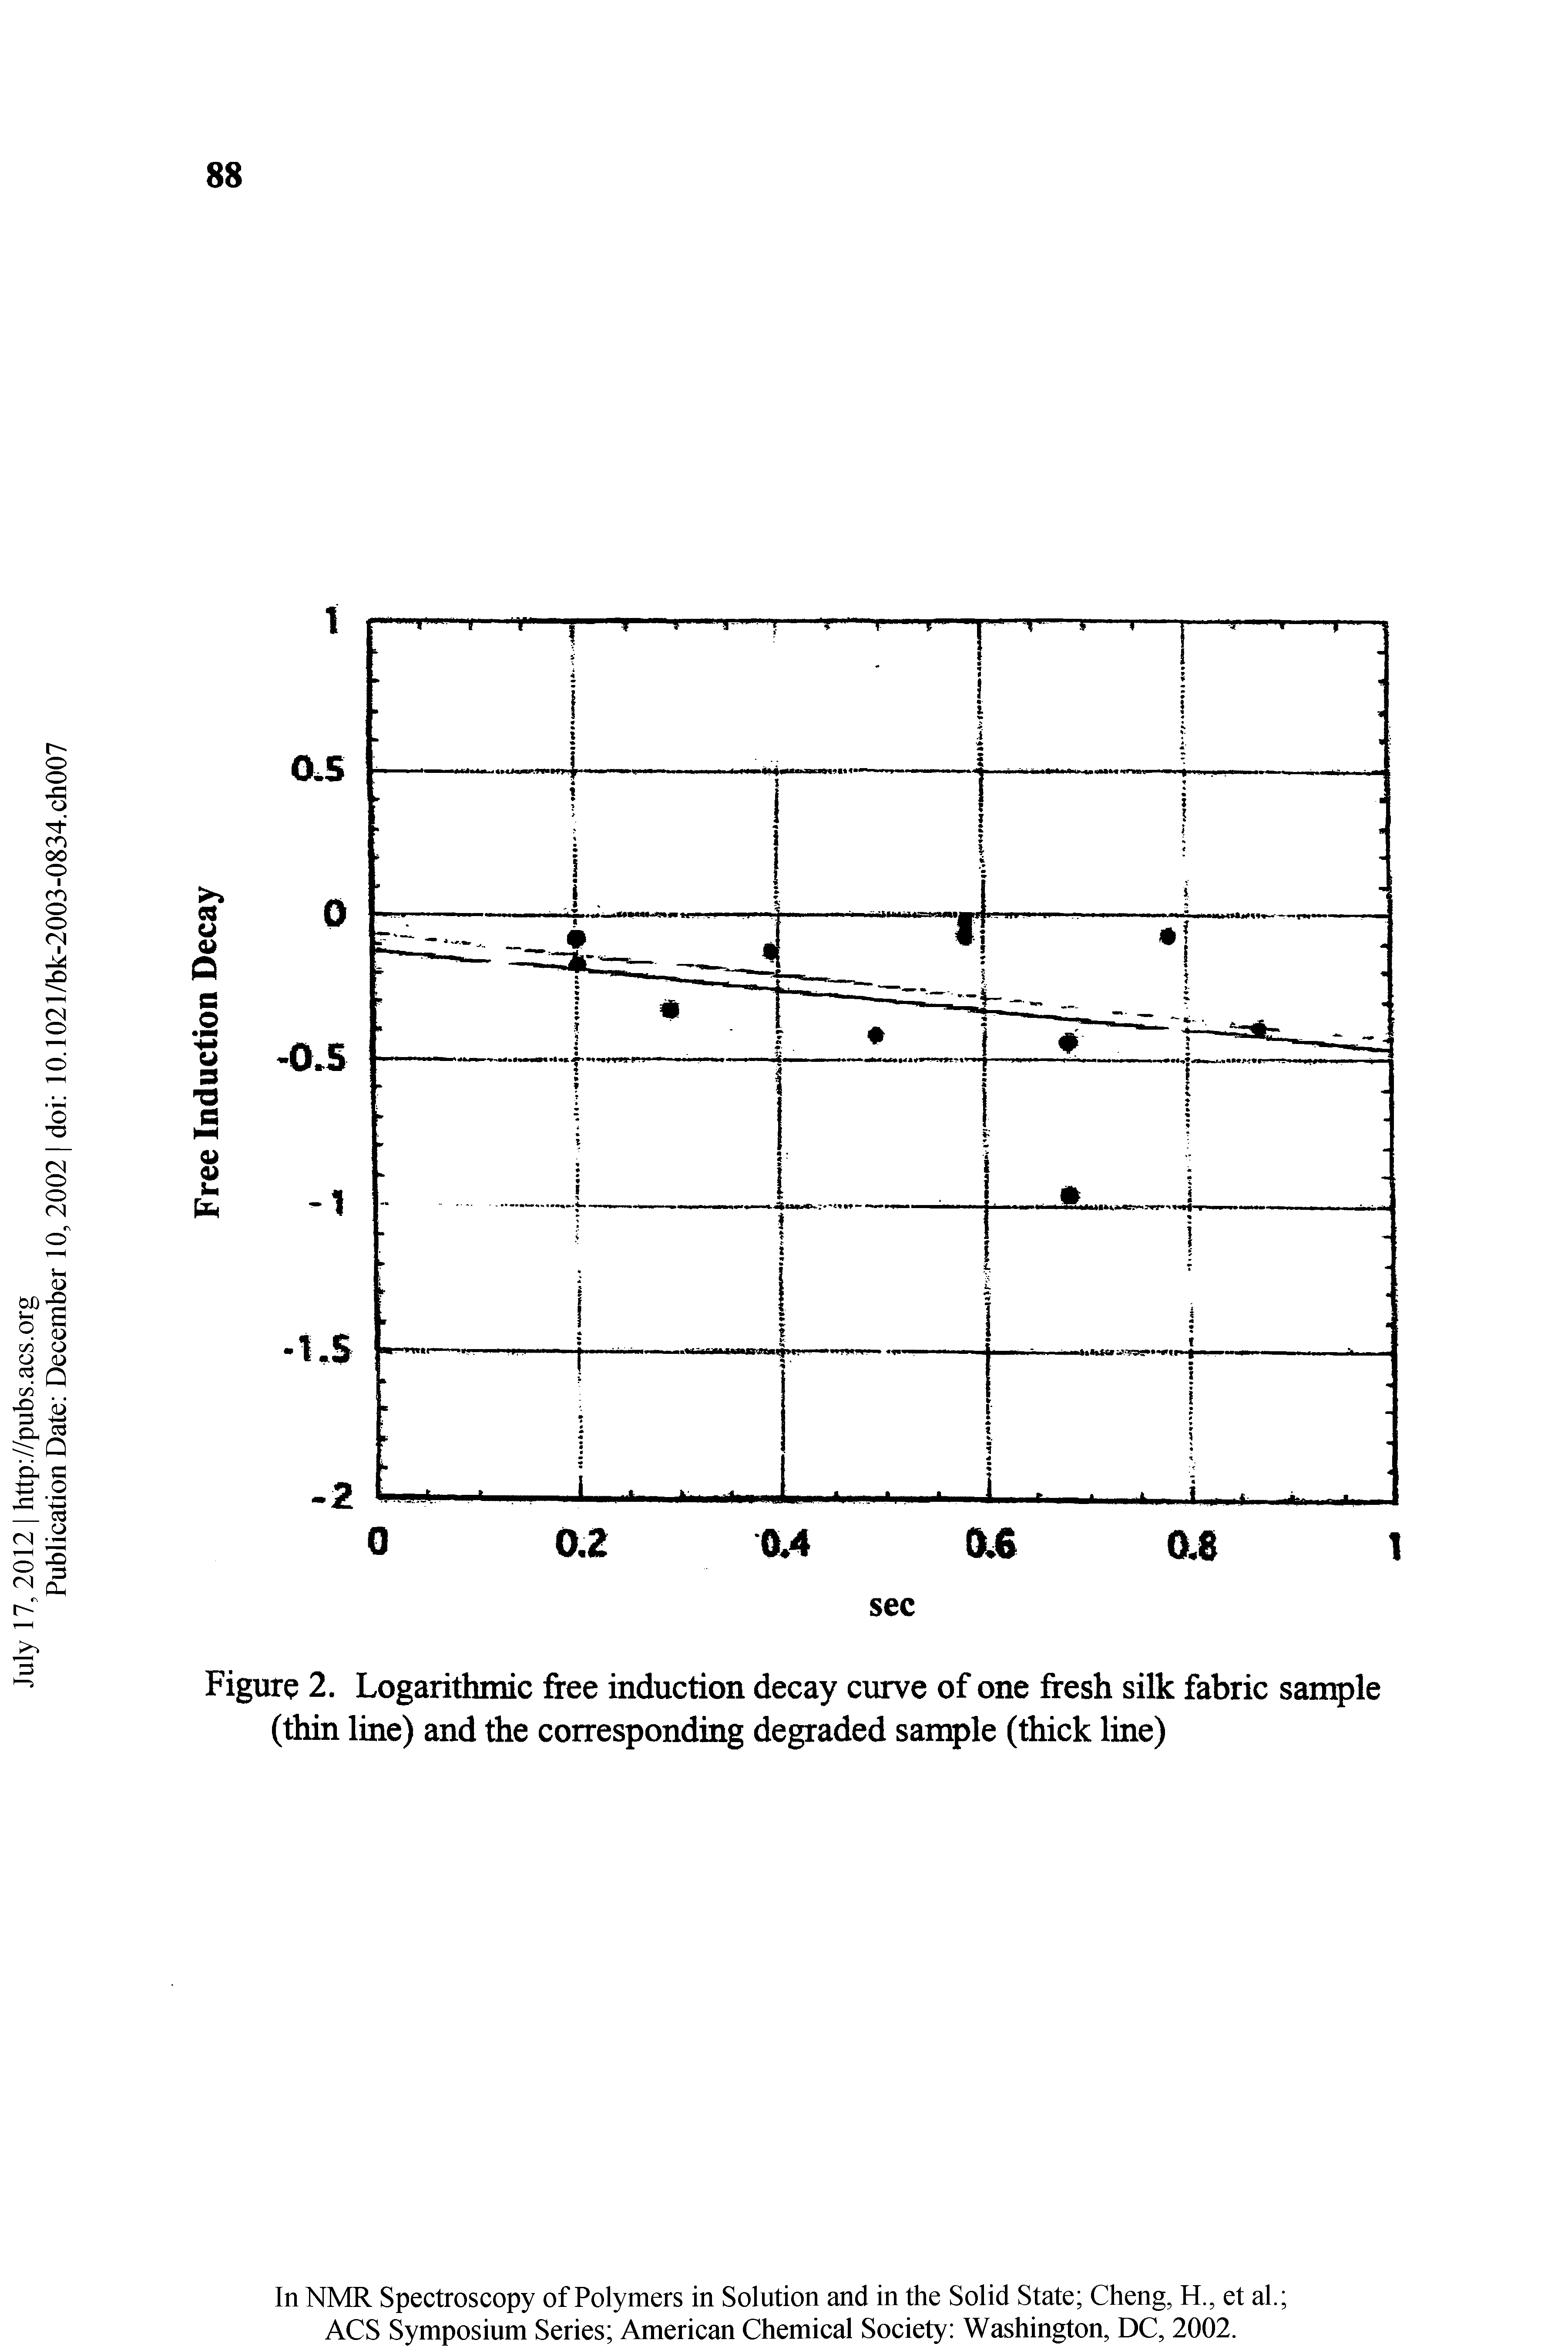 Figure 2. Logarithmic free induction decay curve of one fresh silk fabric sample (thin line) and the corresponding degraded sample (thick line)...